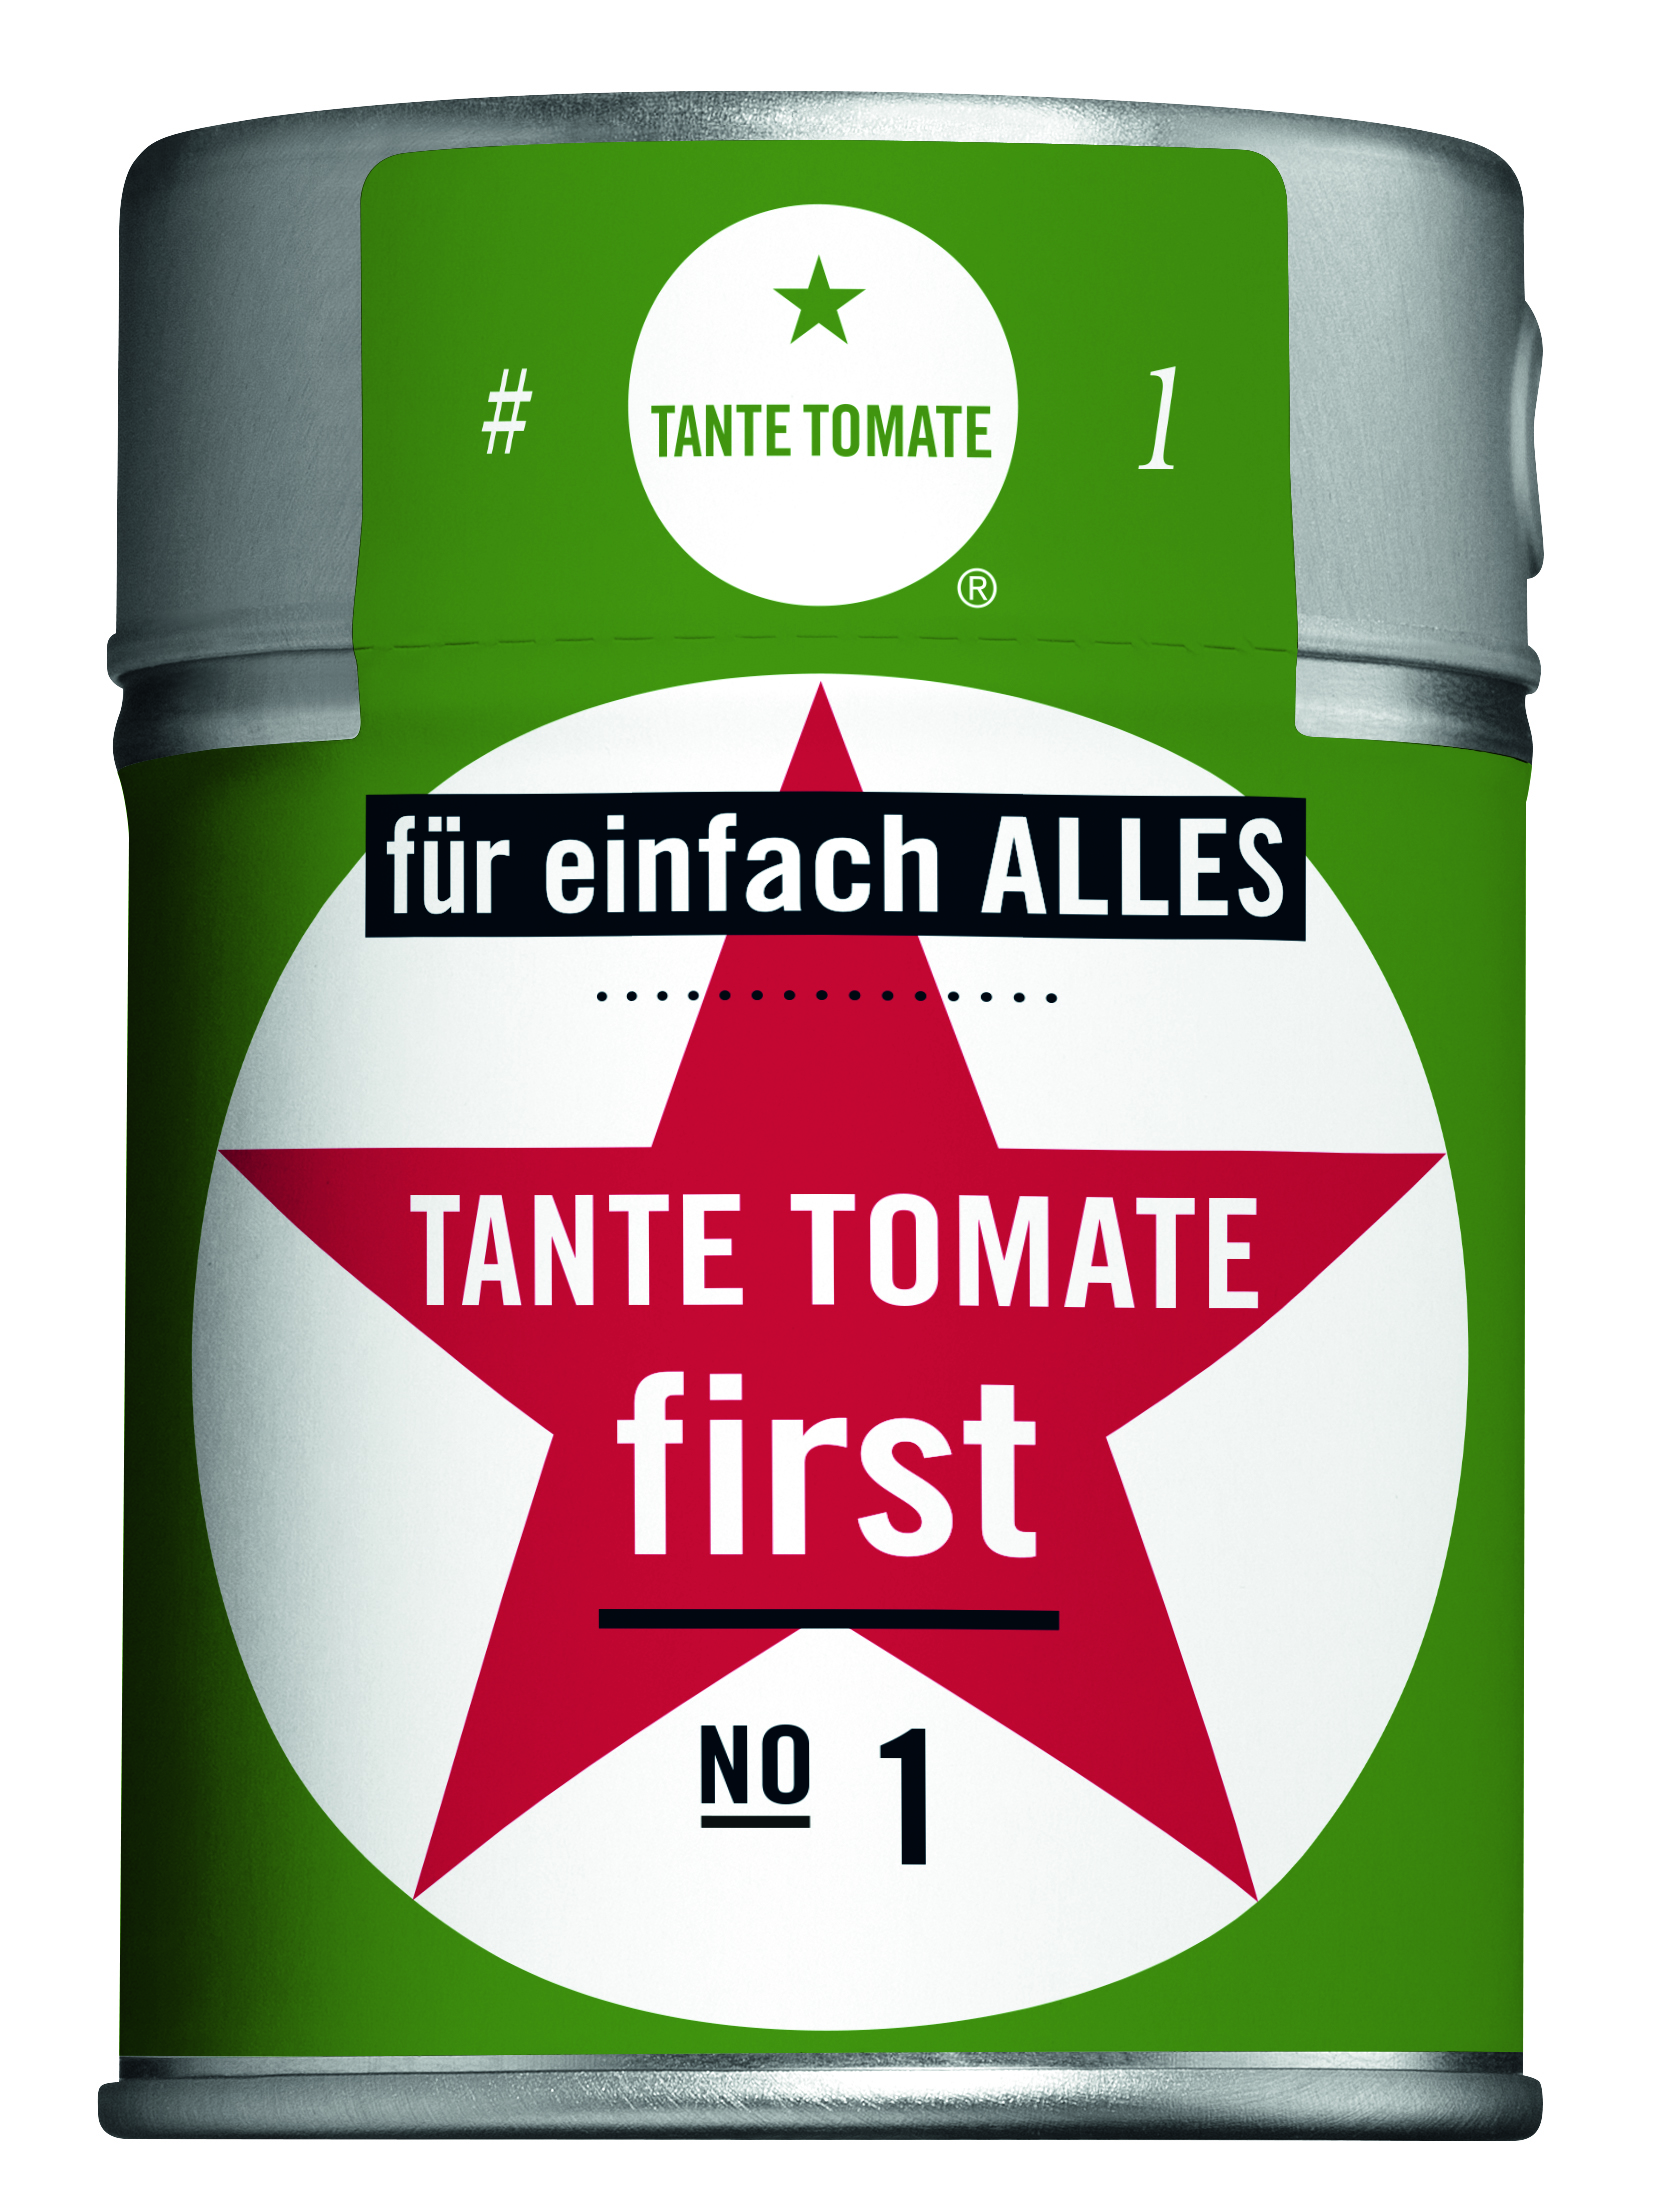 #1 Tante Tomate first